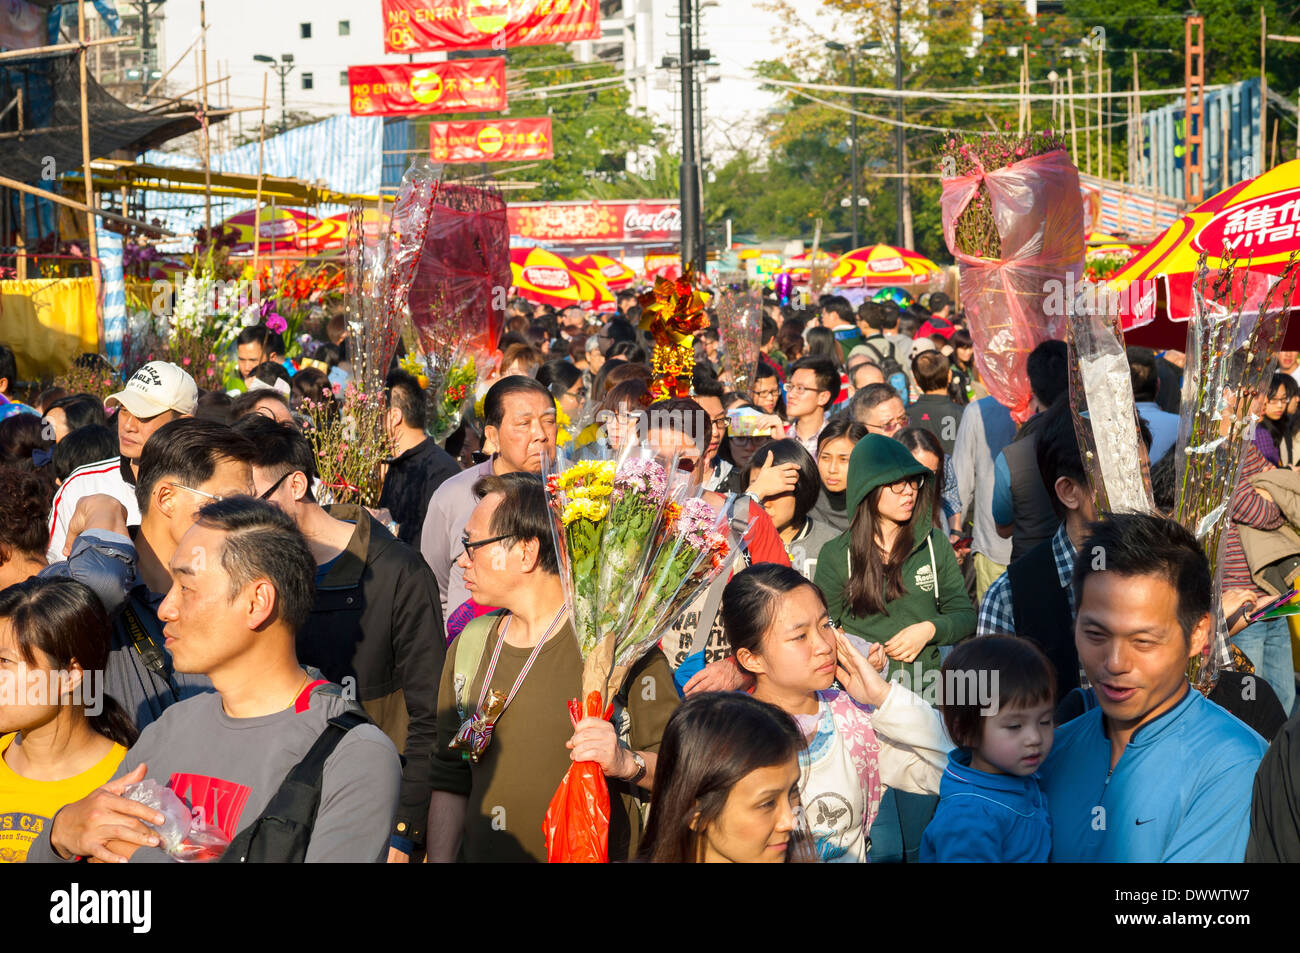 A busy day at the new year flower market in Victoria Park, Hong Kong Stock Photo